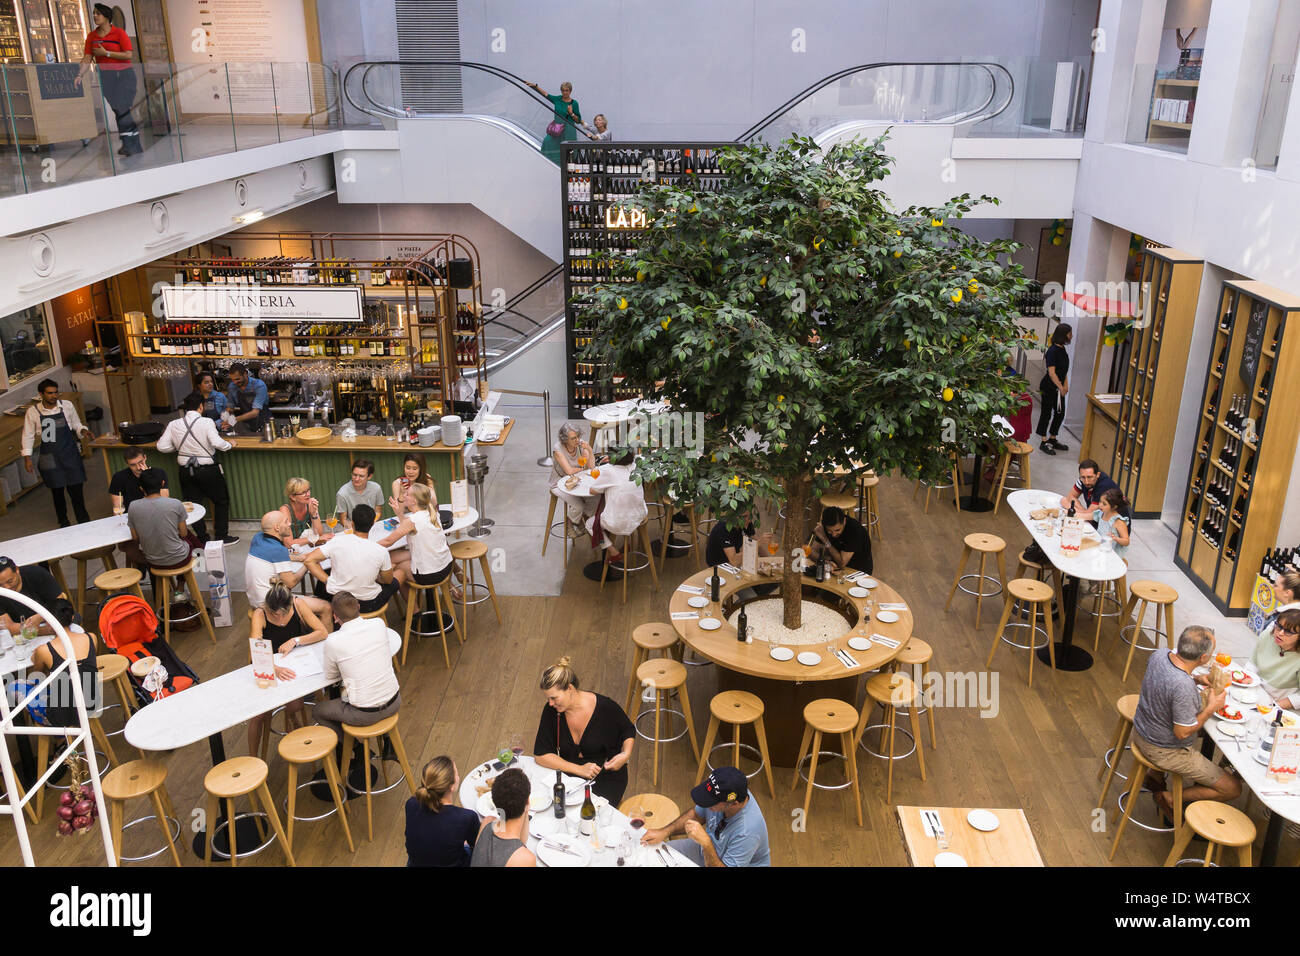 Eataly Paris - Interior of Eataly, the Italian marketplace and food hall, in Marais district of Paris, France, Europe. Stock Photo